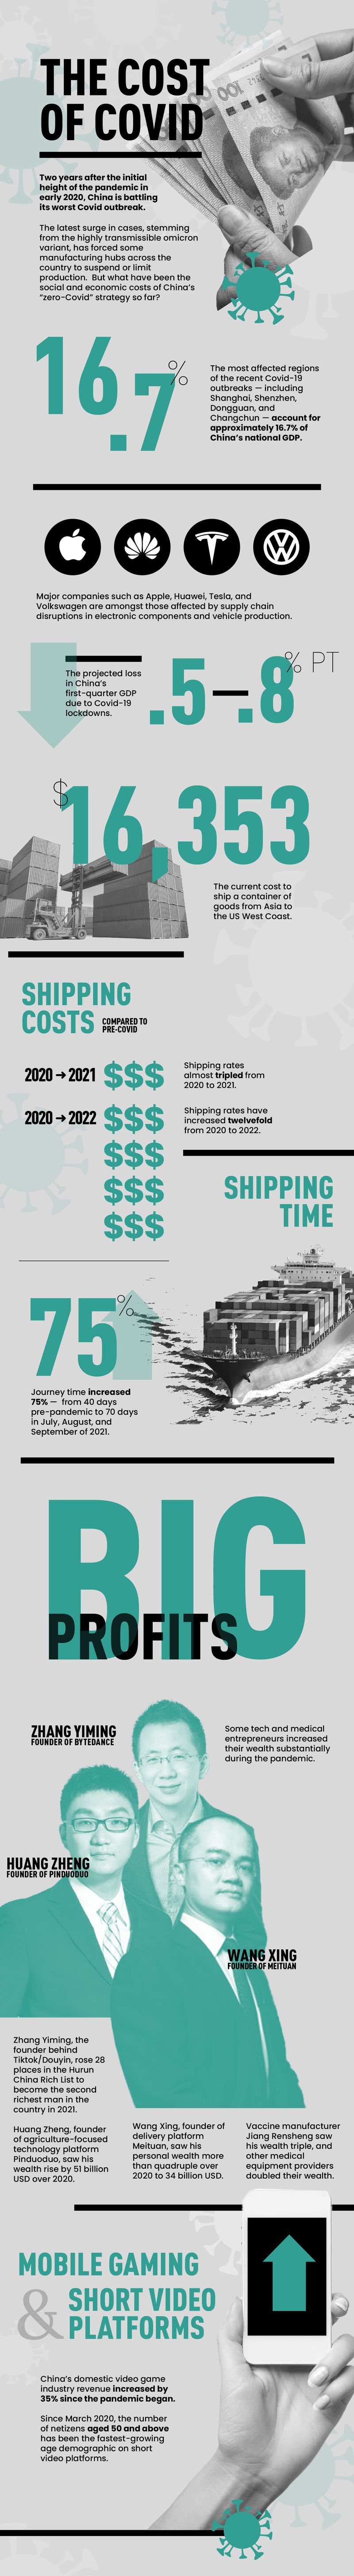 Cost of Covid Infographic, China’s Covid Winners and Losers, shipping costs, who made the most profit